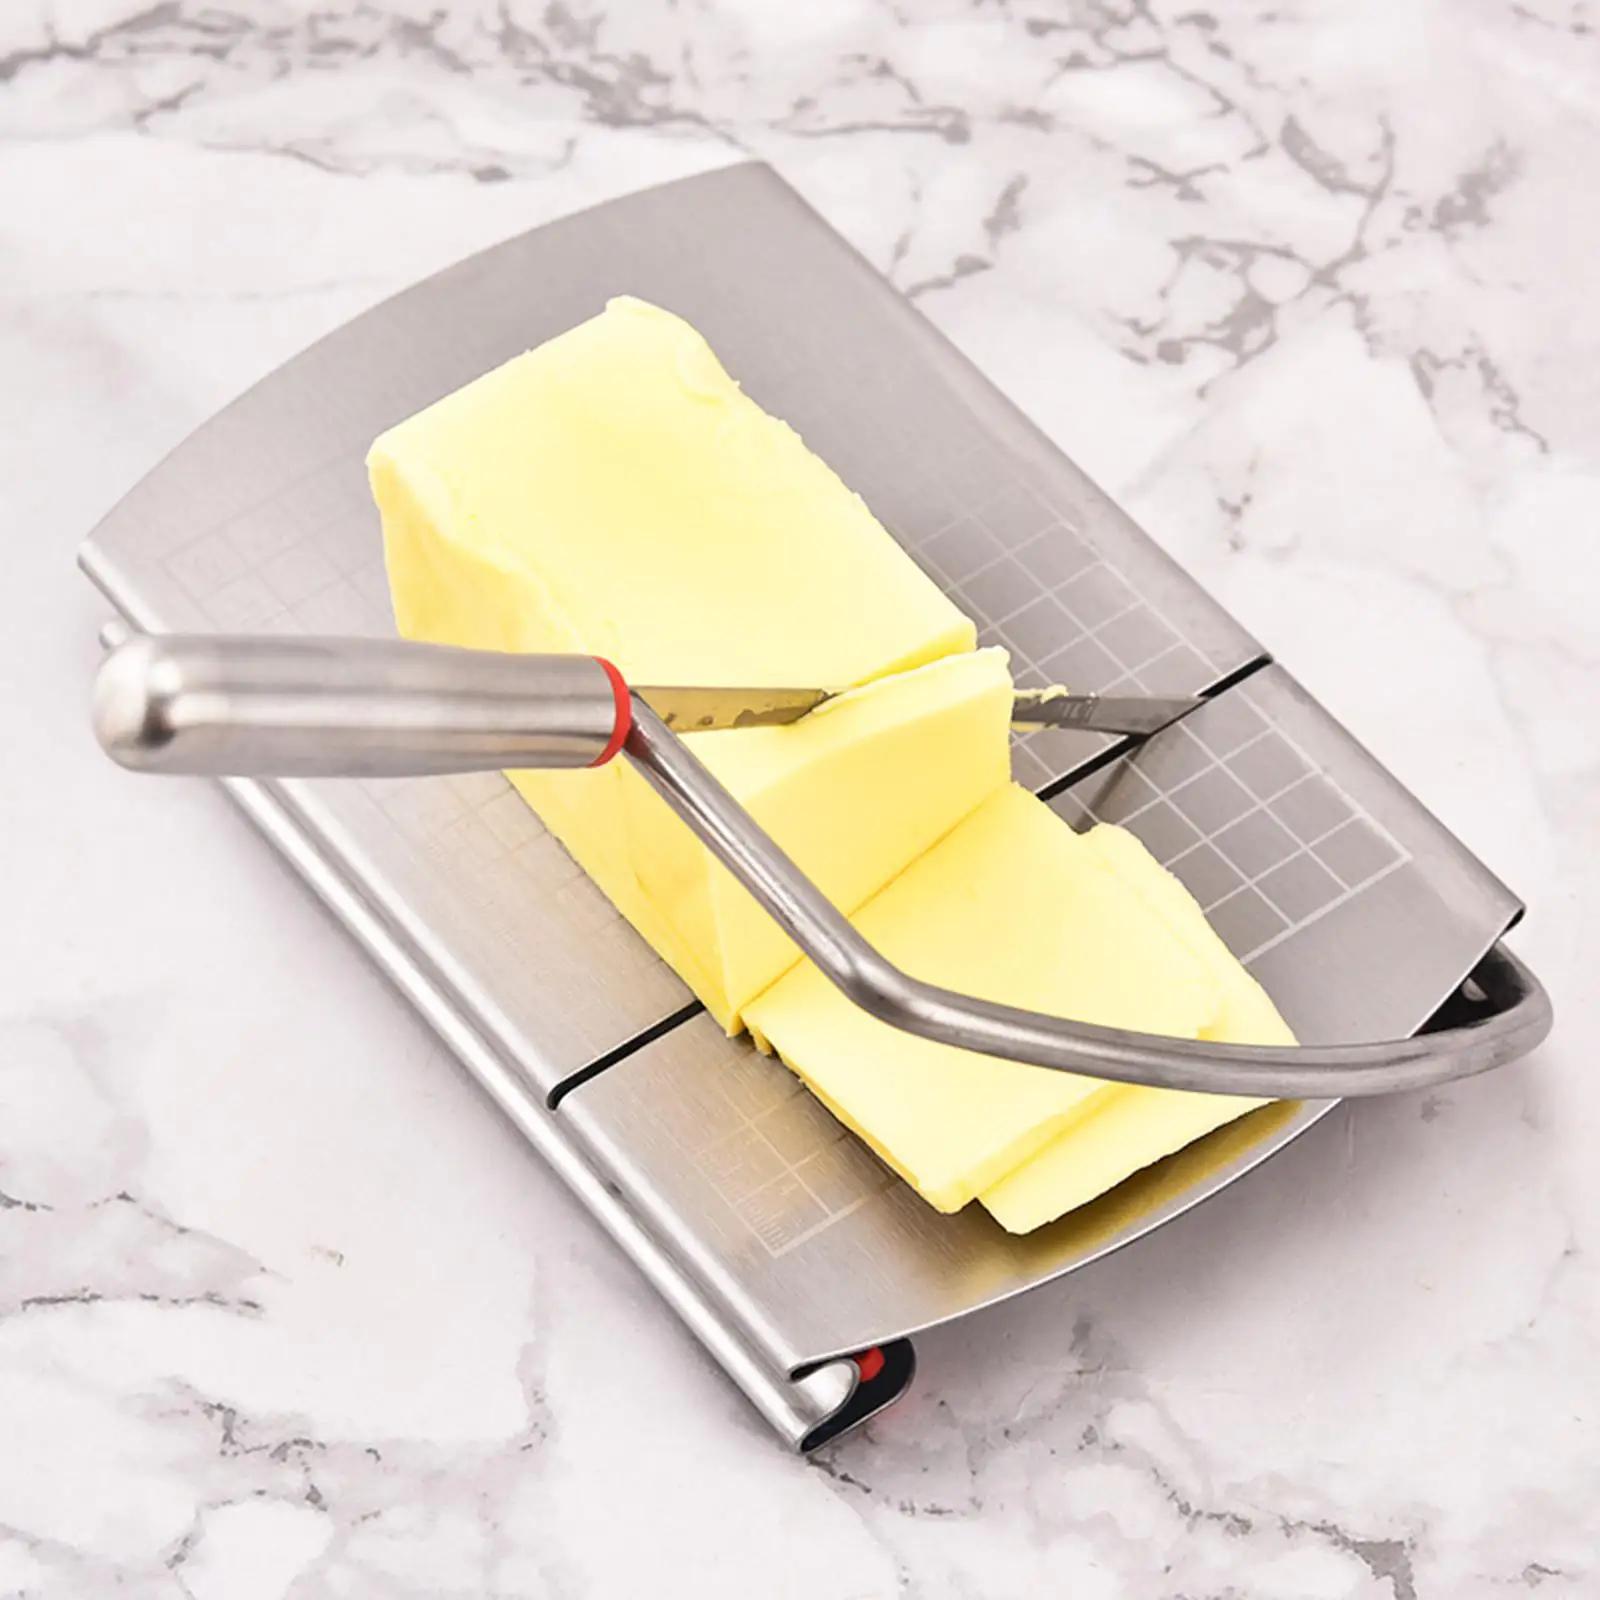 Cheese Slicer Easy to Clean Precise Scale Professional Convenient Heavy Duty Multifunctional Cheese Cutter for Kitchen Cafe Home